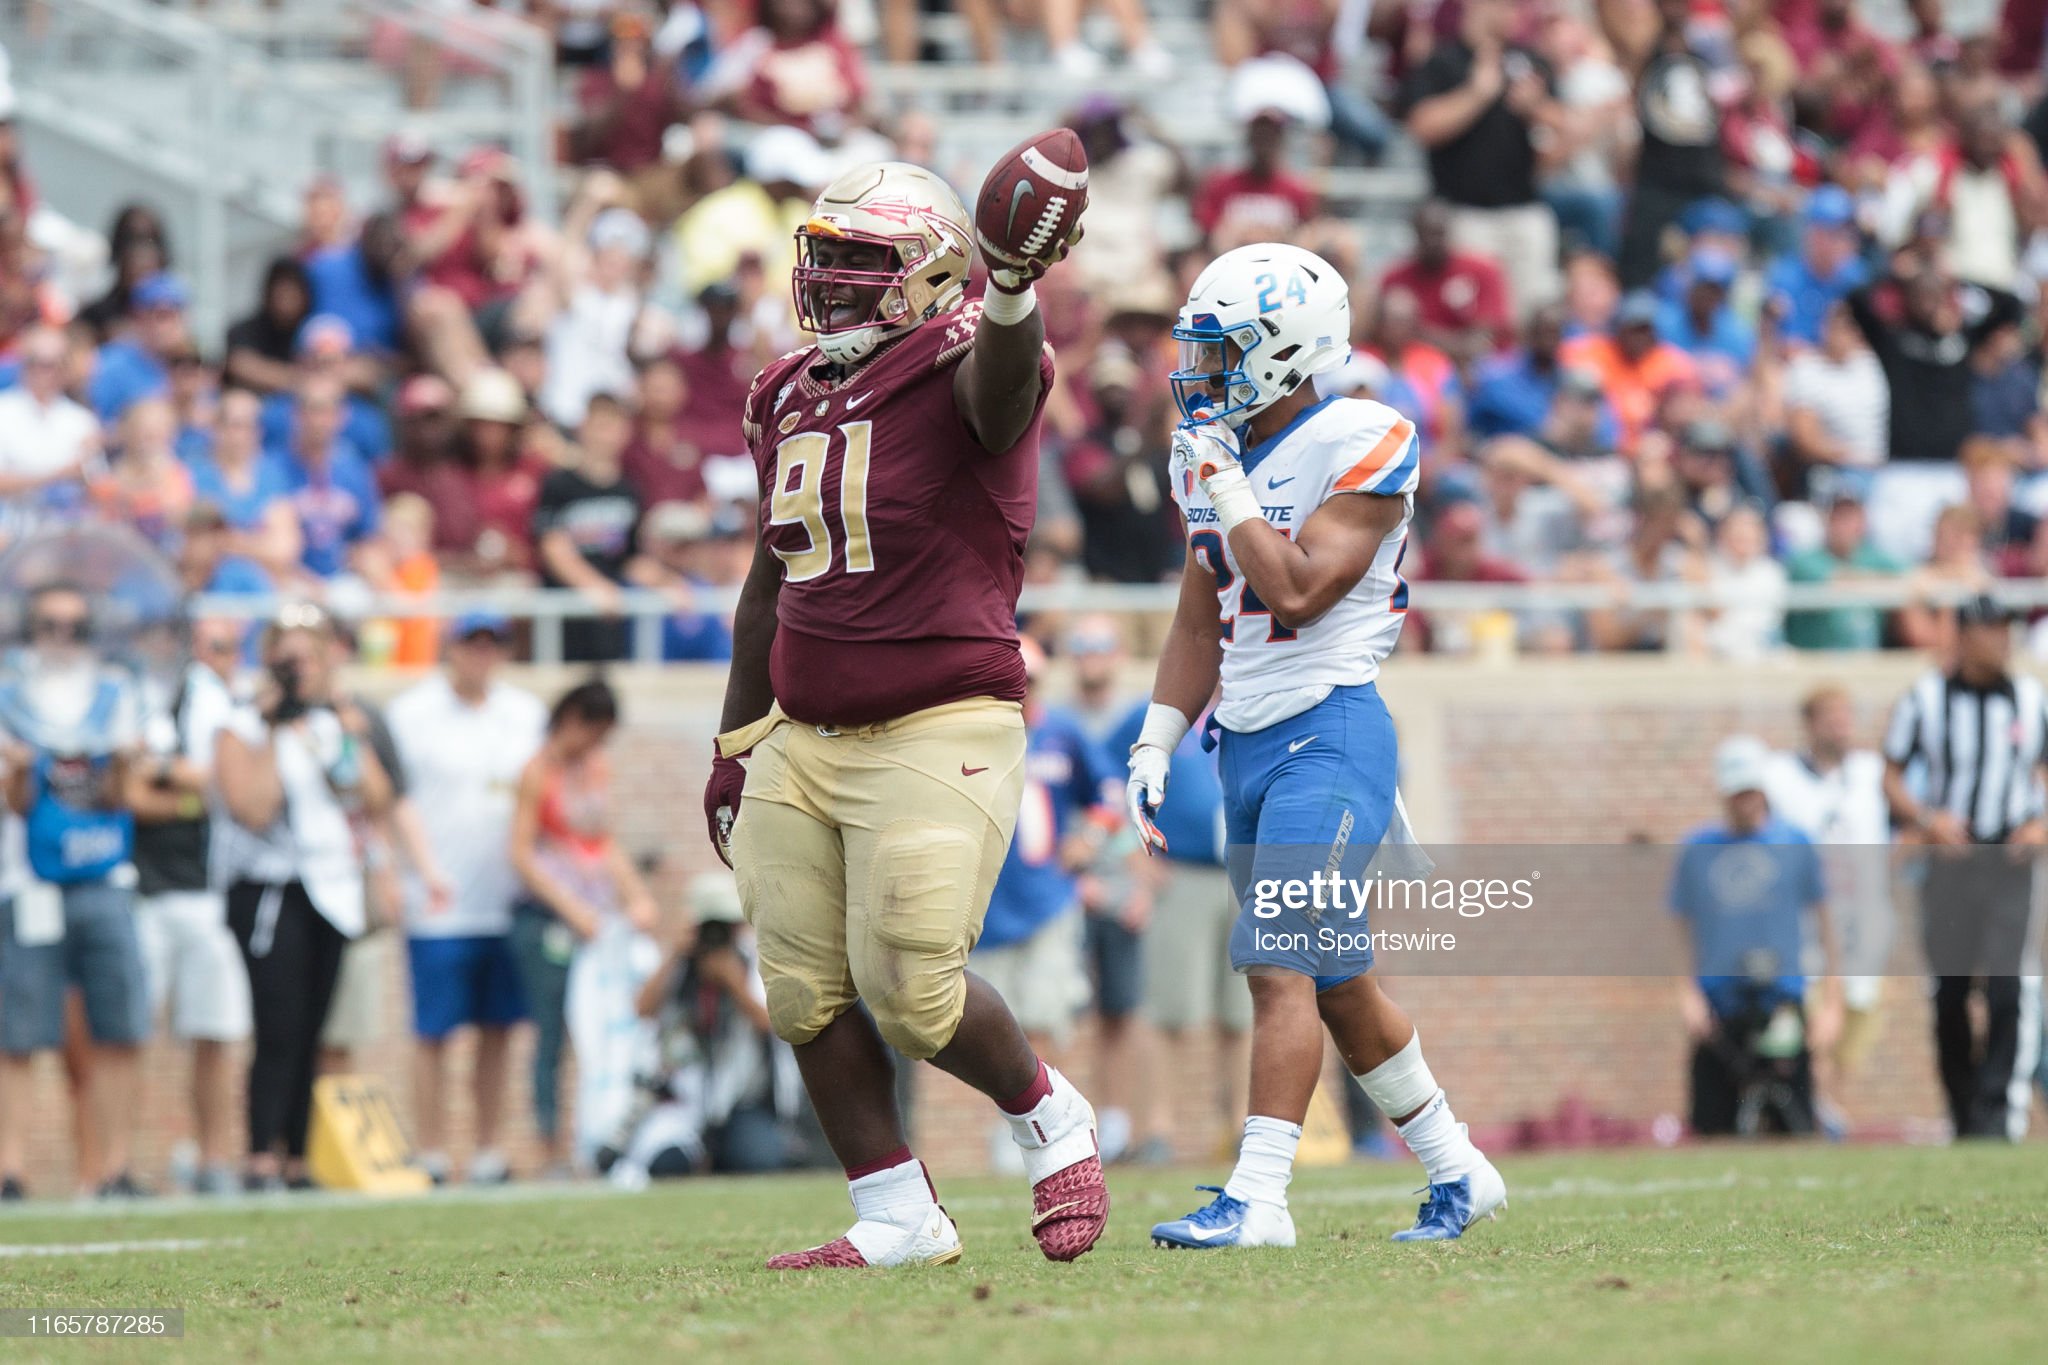 2023 NFL Draft Scouting Report: DT Robert Cooper, Florida State